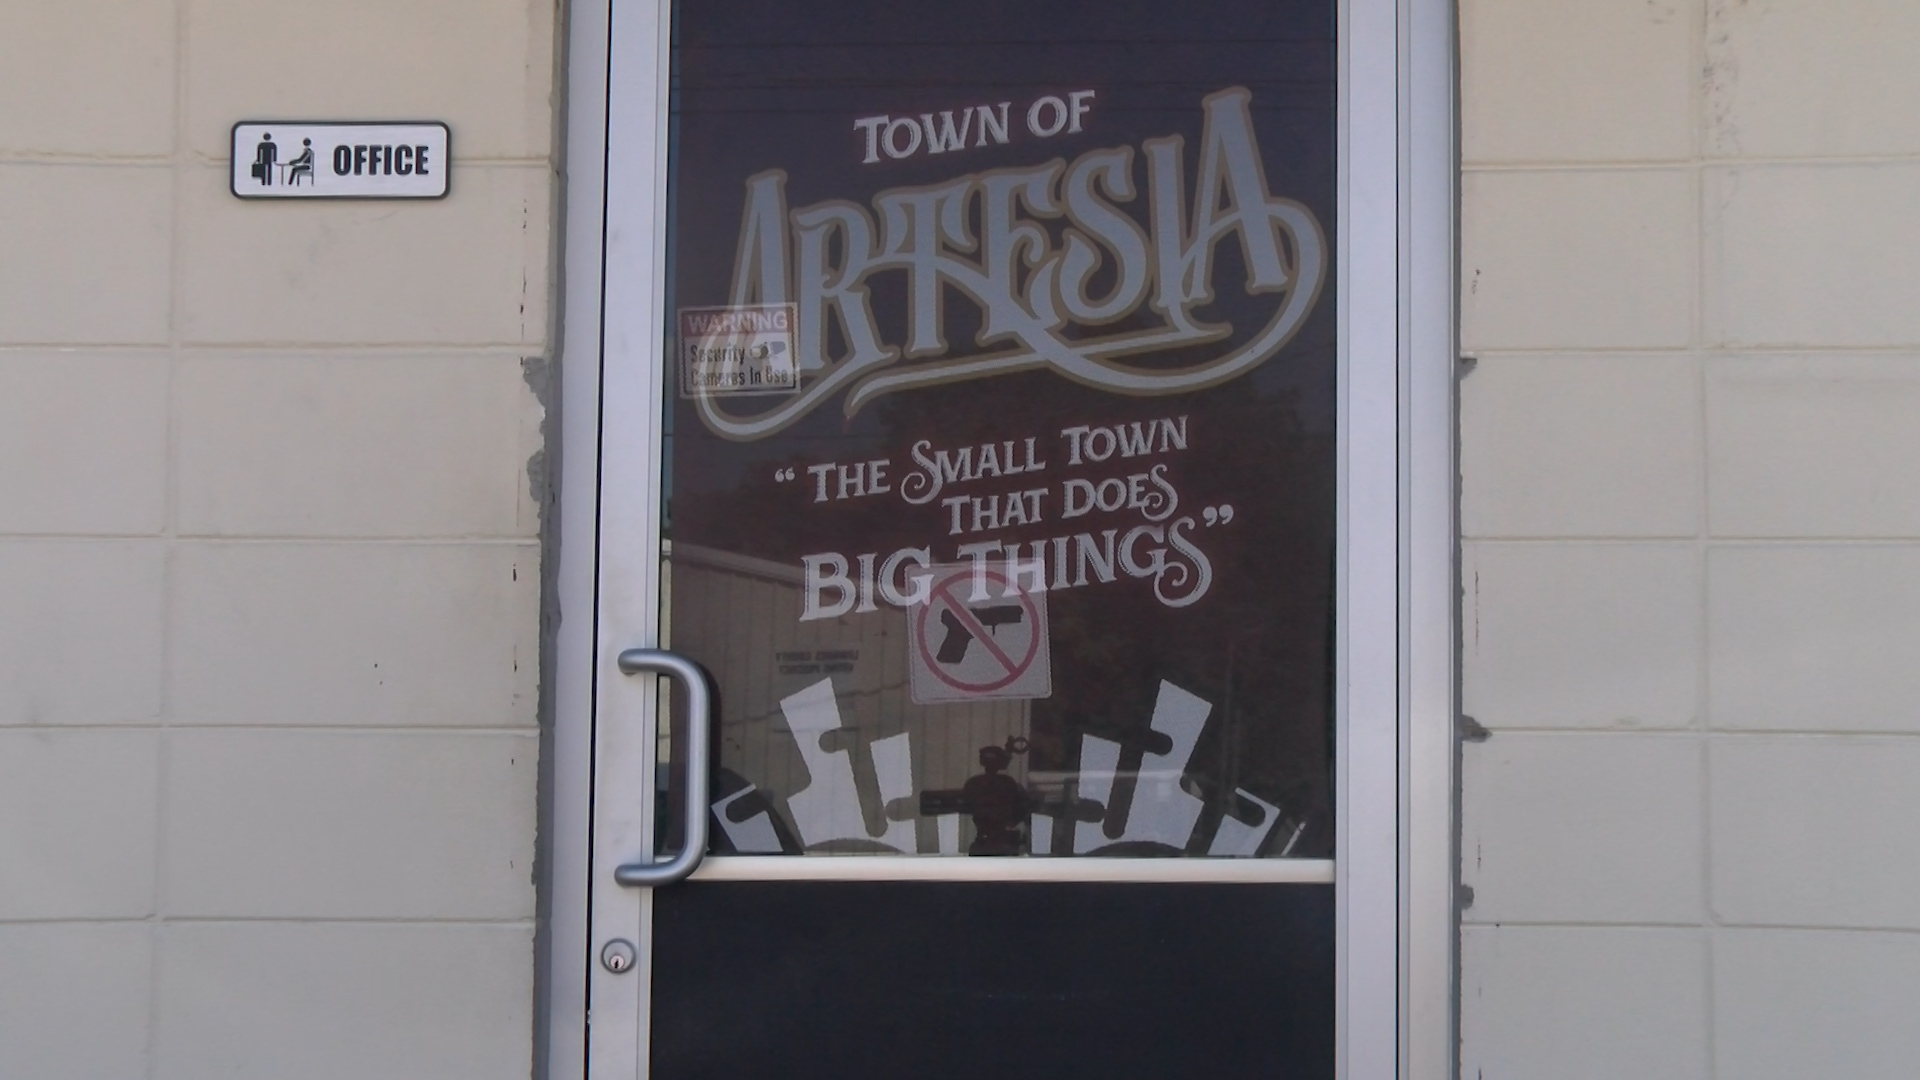 Artesia Day 2022 is here and people are thrilled